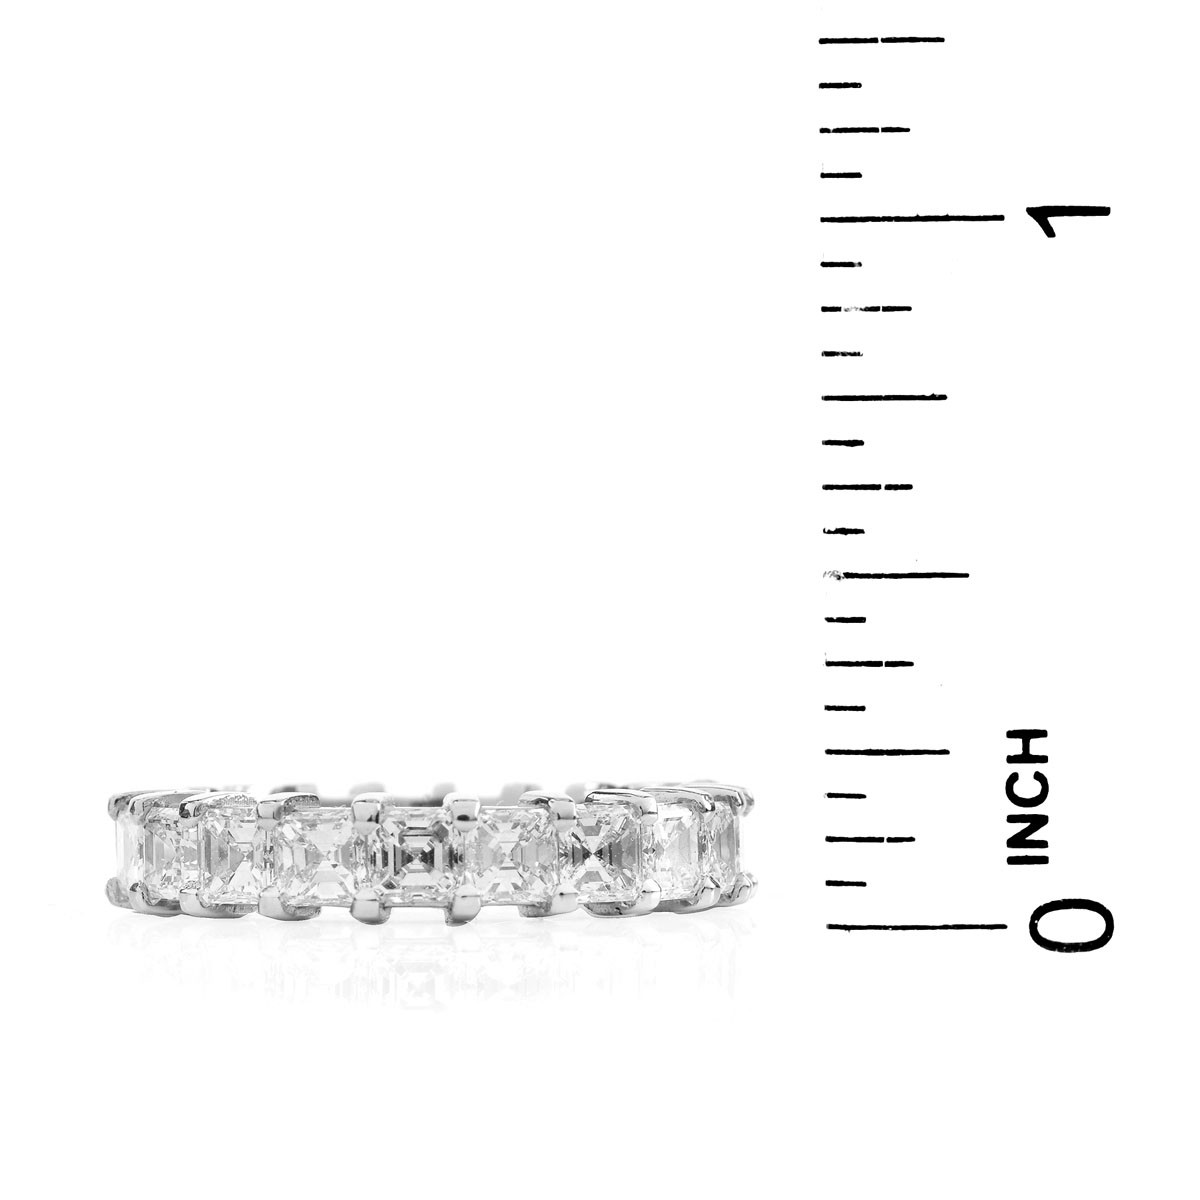 Approx. 3.90 Carat Asher Cut Diamond and Platinum Eternity Band.